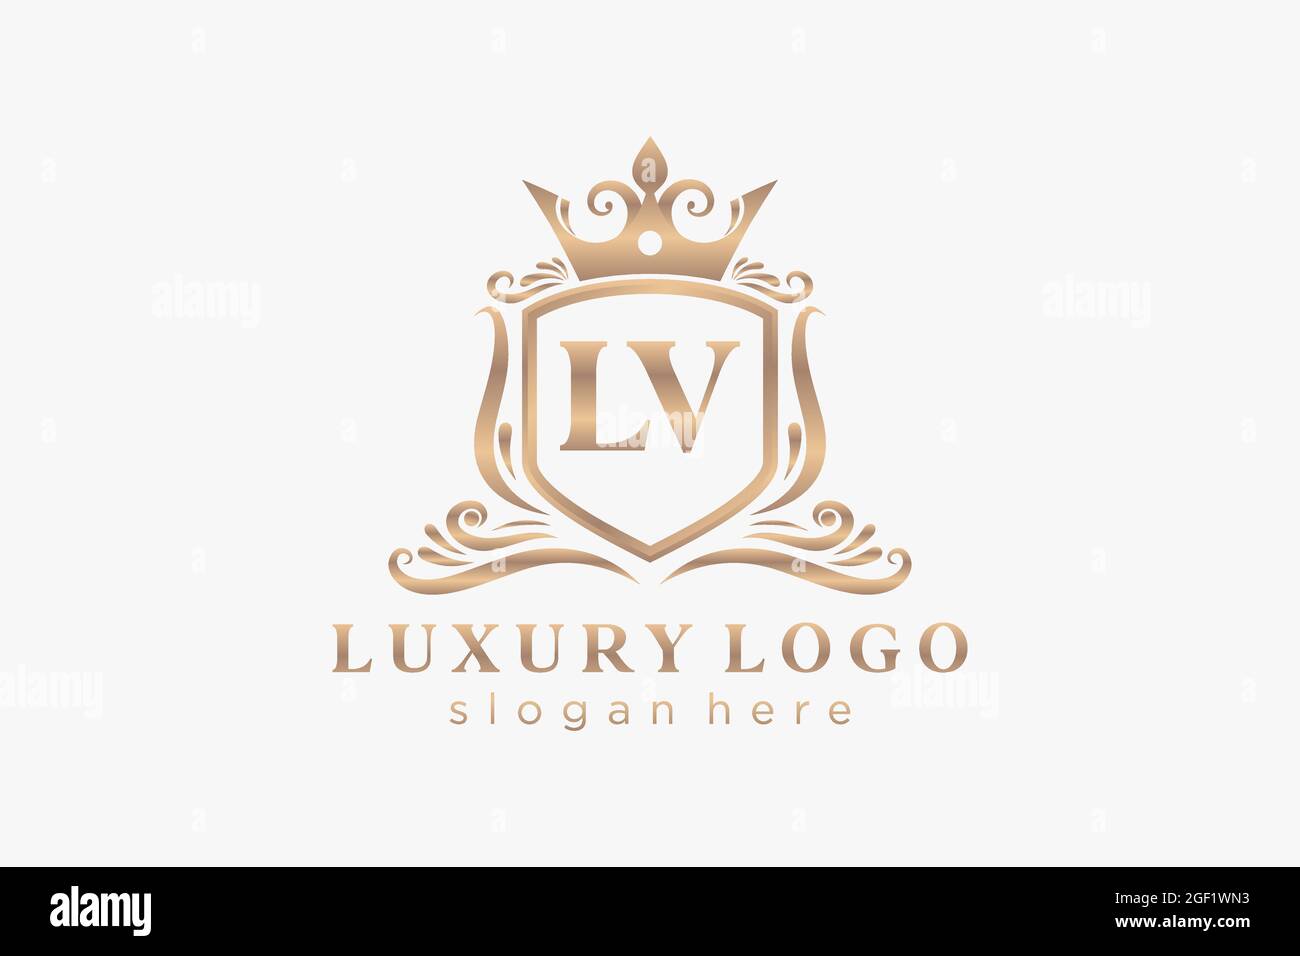 Vuitton logo Cut Out Stock Images & Pictures - Alamy